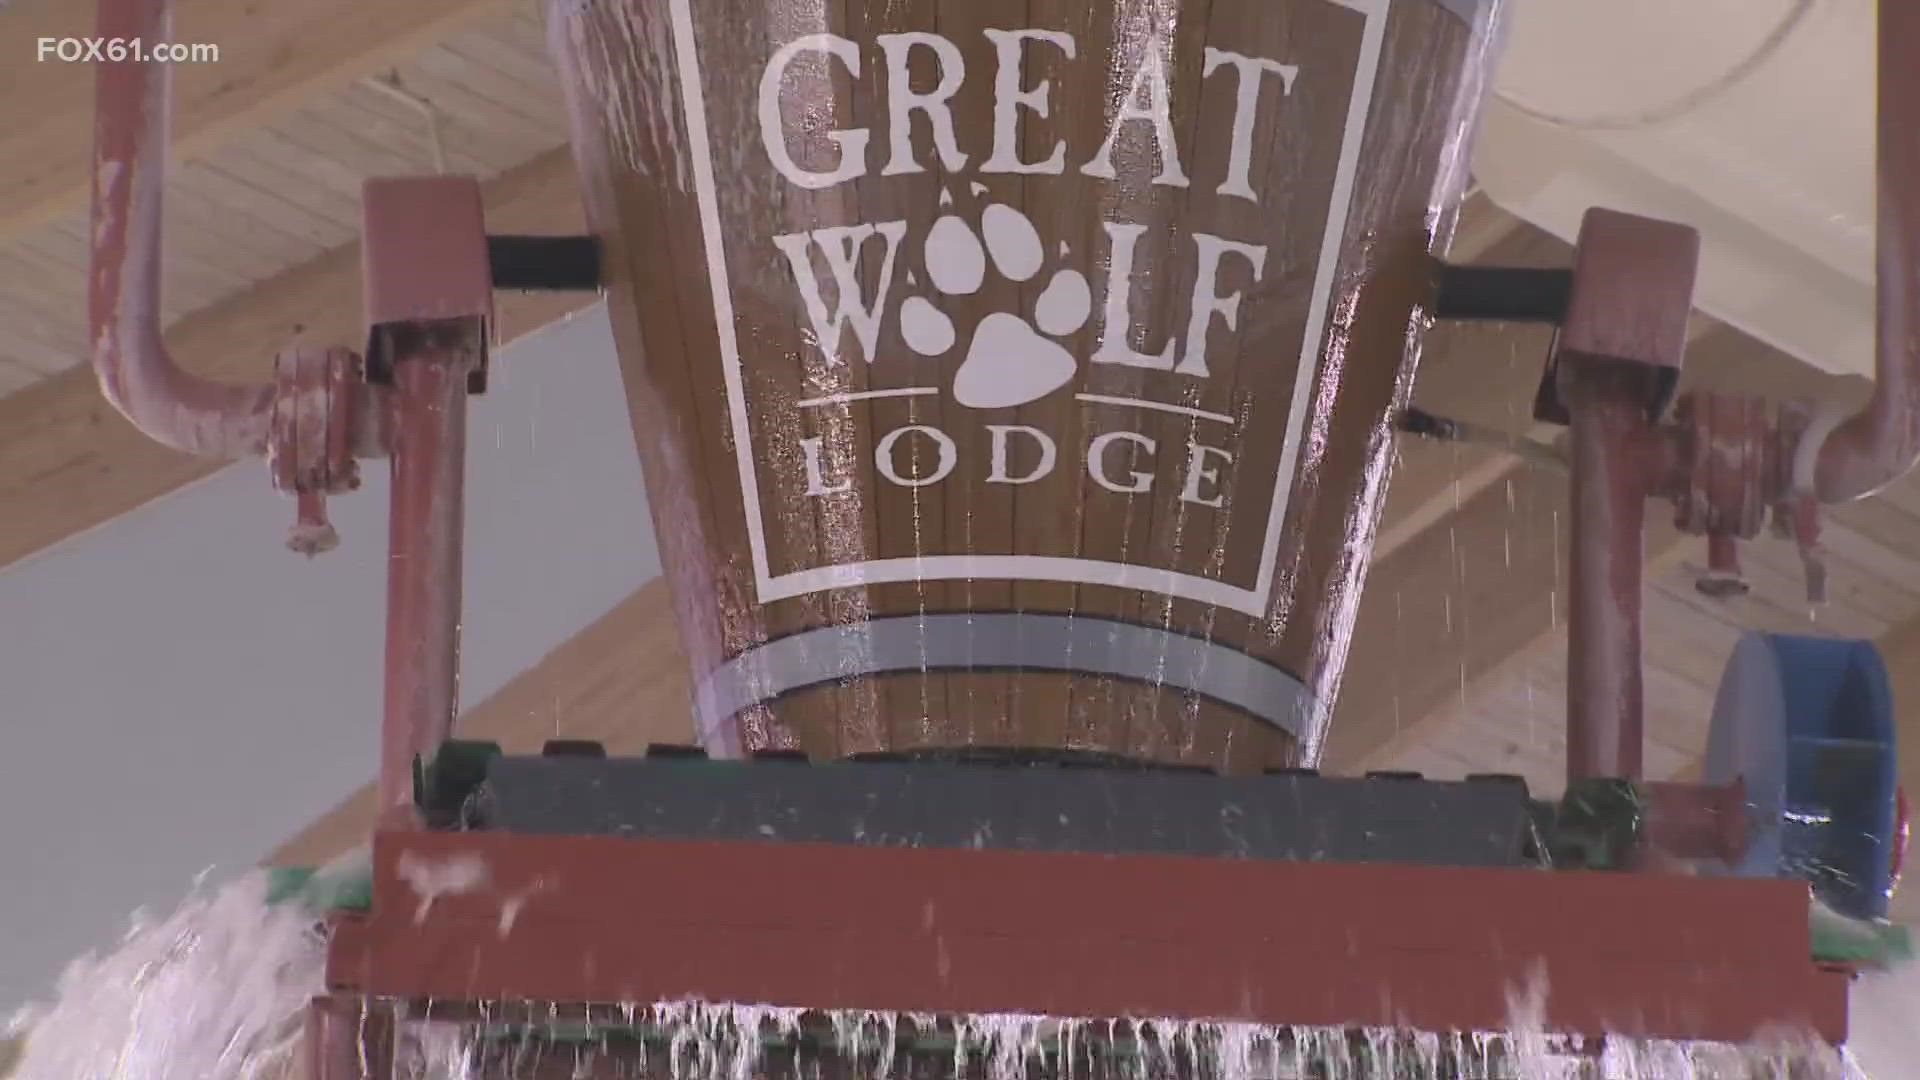 At Great Wolf Lodge in Fitchburg, Massachusetts, guests can spend the night or come for the day to enjoy family-friendly activities all under one roof.